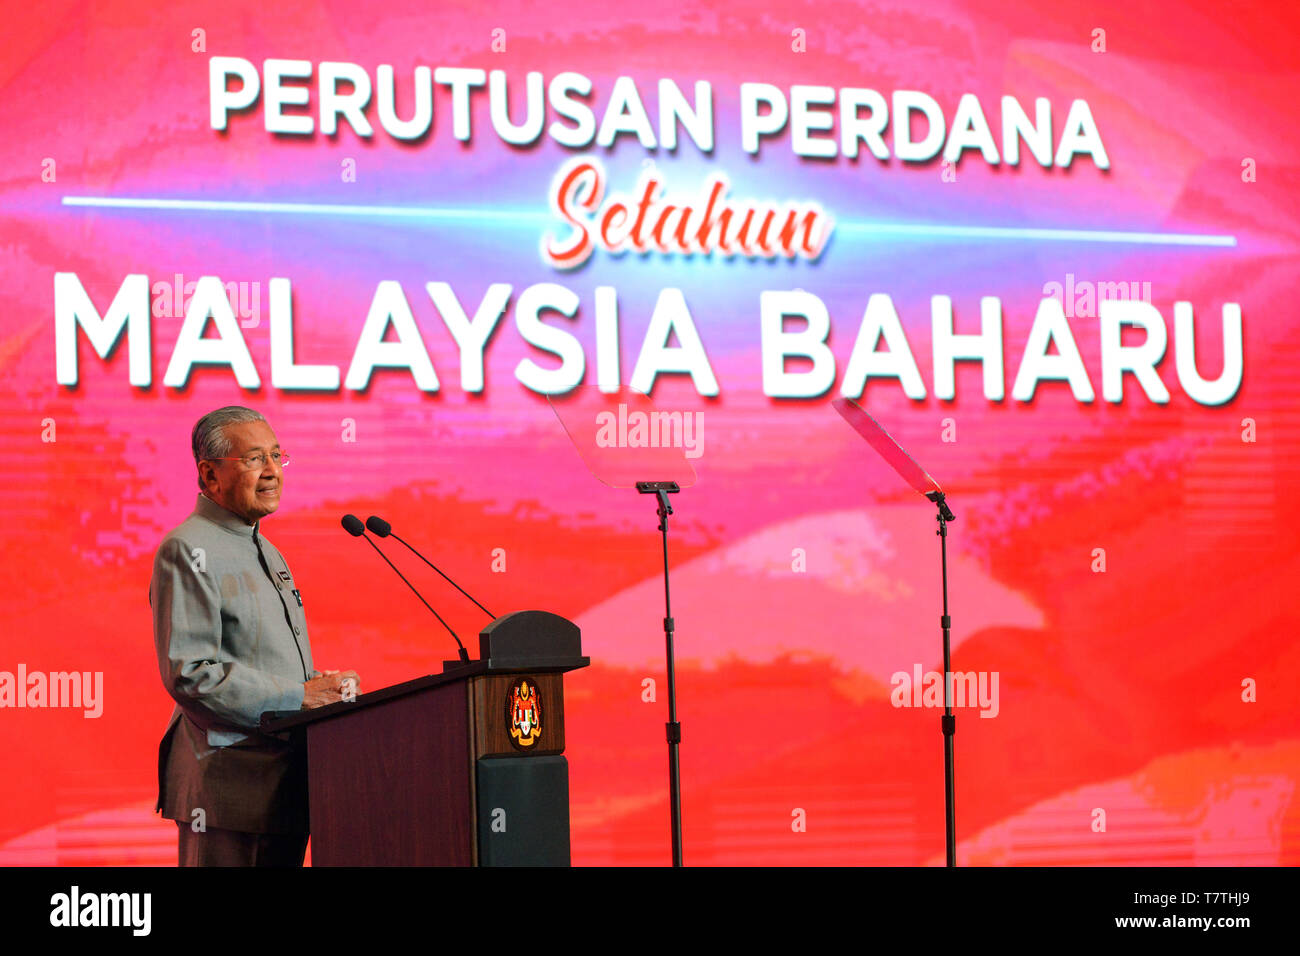 (190509) -- PUTRAJAYA, May 9, 2019 (Xinhua) -- Malaysian Prime Minister Mahathir Mohamad speaks at an event to mark the first year since his Pakatan Harapan (PH) coalition won power at the national polls on May 9 last year,  in Putrajaya, Malaysia, May 9, 2019. Malaysia has achieved progress in combating corruption and in restoring government institutions after taking over the government in a smooth transition but much remains to be done especially in repairing the national economy, Malaysian Prime Minister Mahathir Mohamad said on Thursday. (Xinhua/Chong Voon Chung) Stock Photo